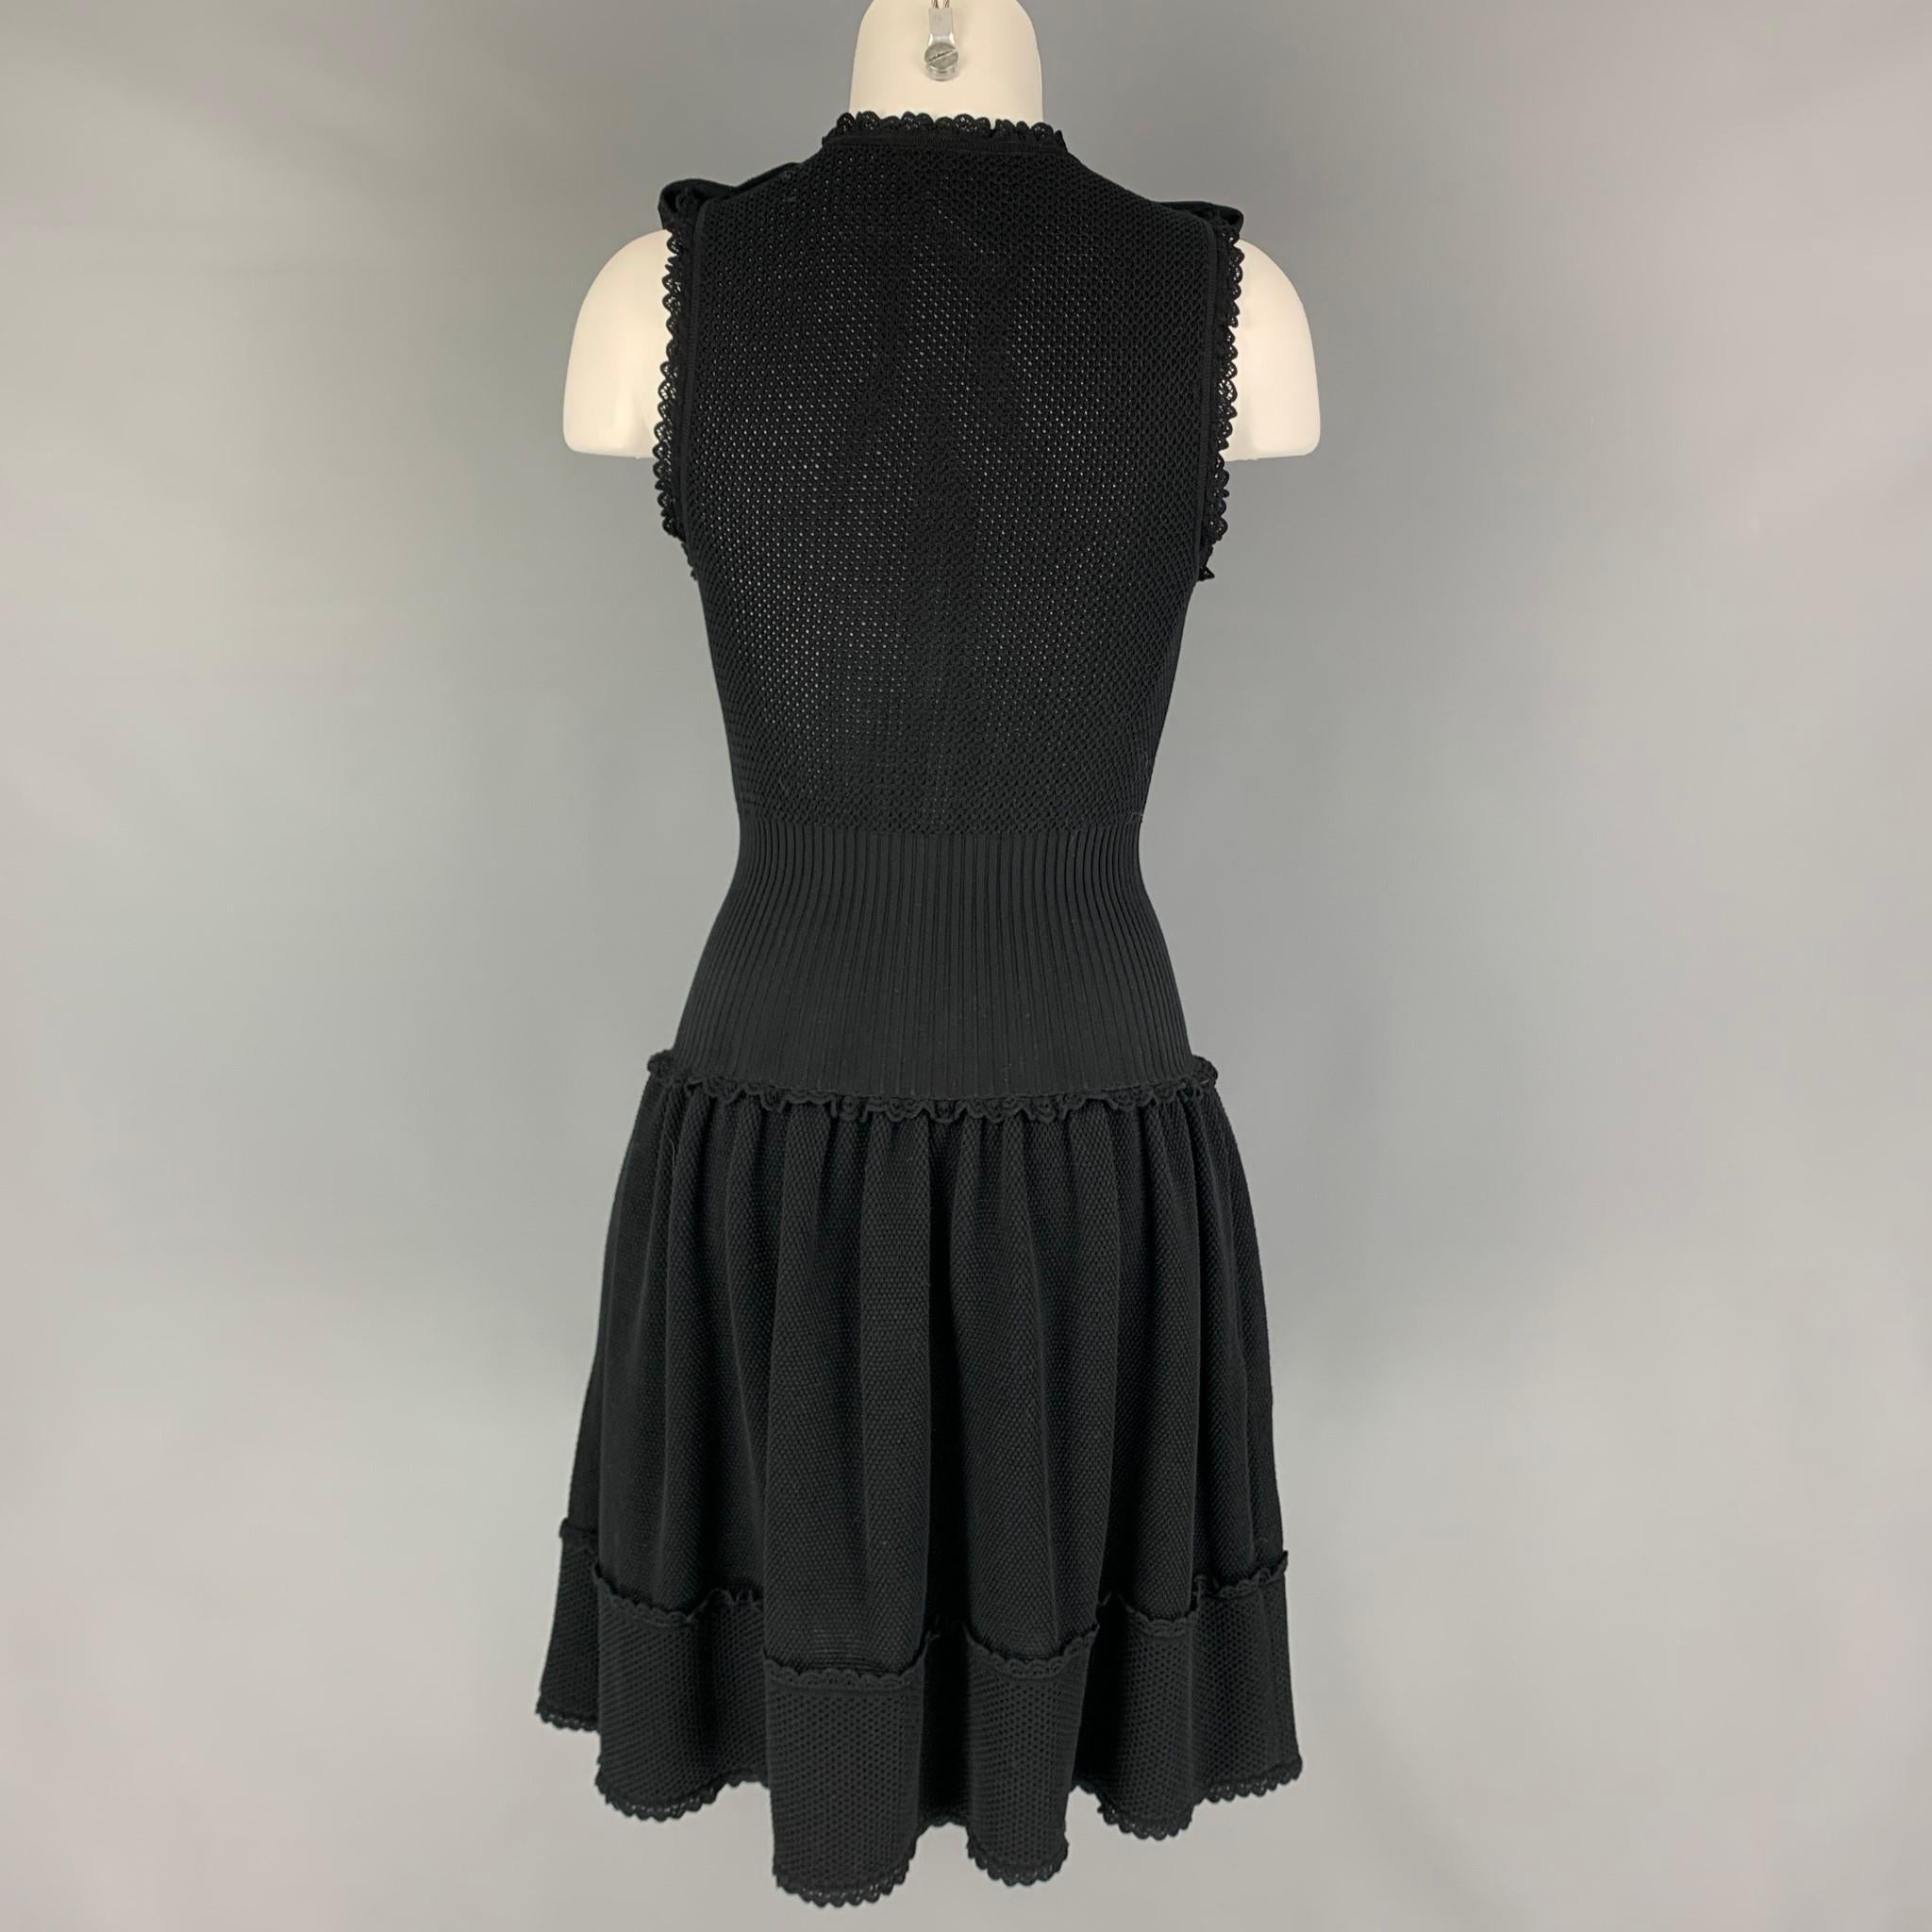 CHANEL Size 2 Black Knitted Cotton Textured Sleeveless Dress 2